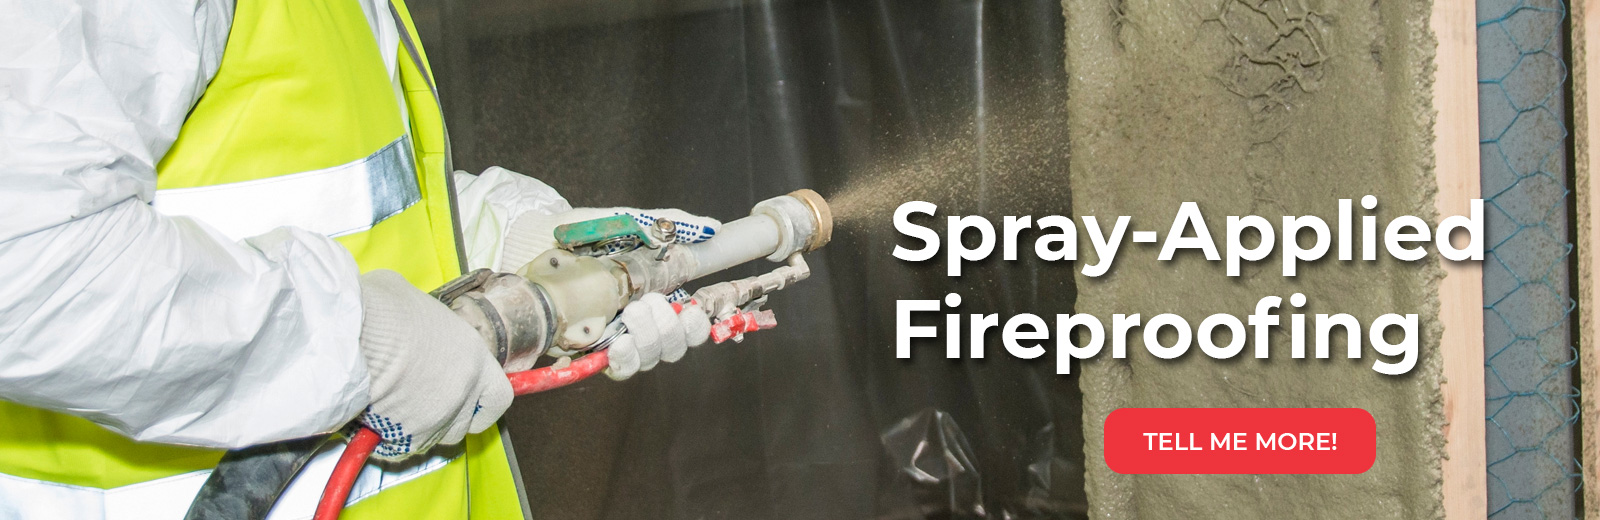 Wellington Environmental spray-applied fireproofing banner image